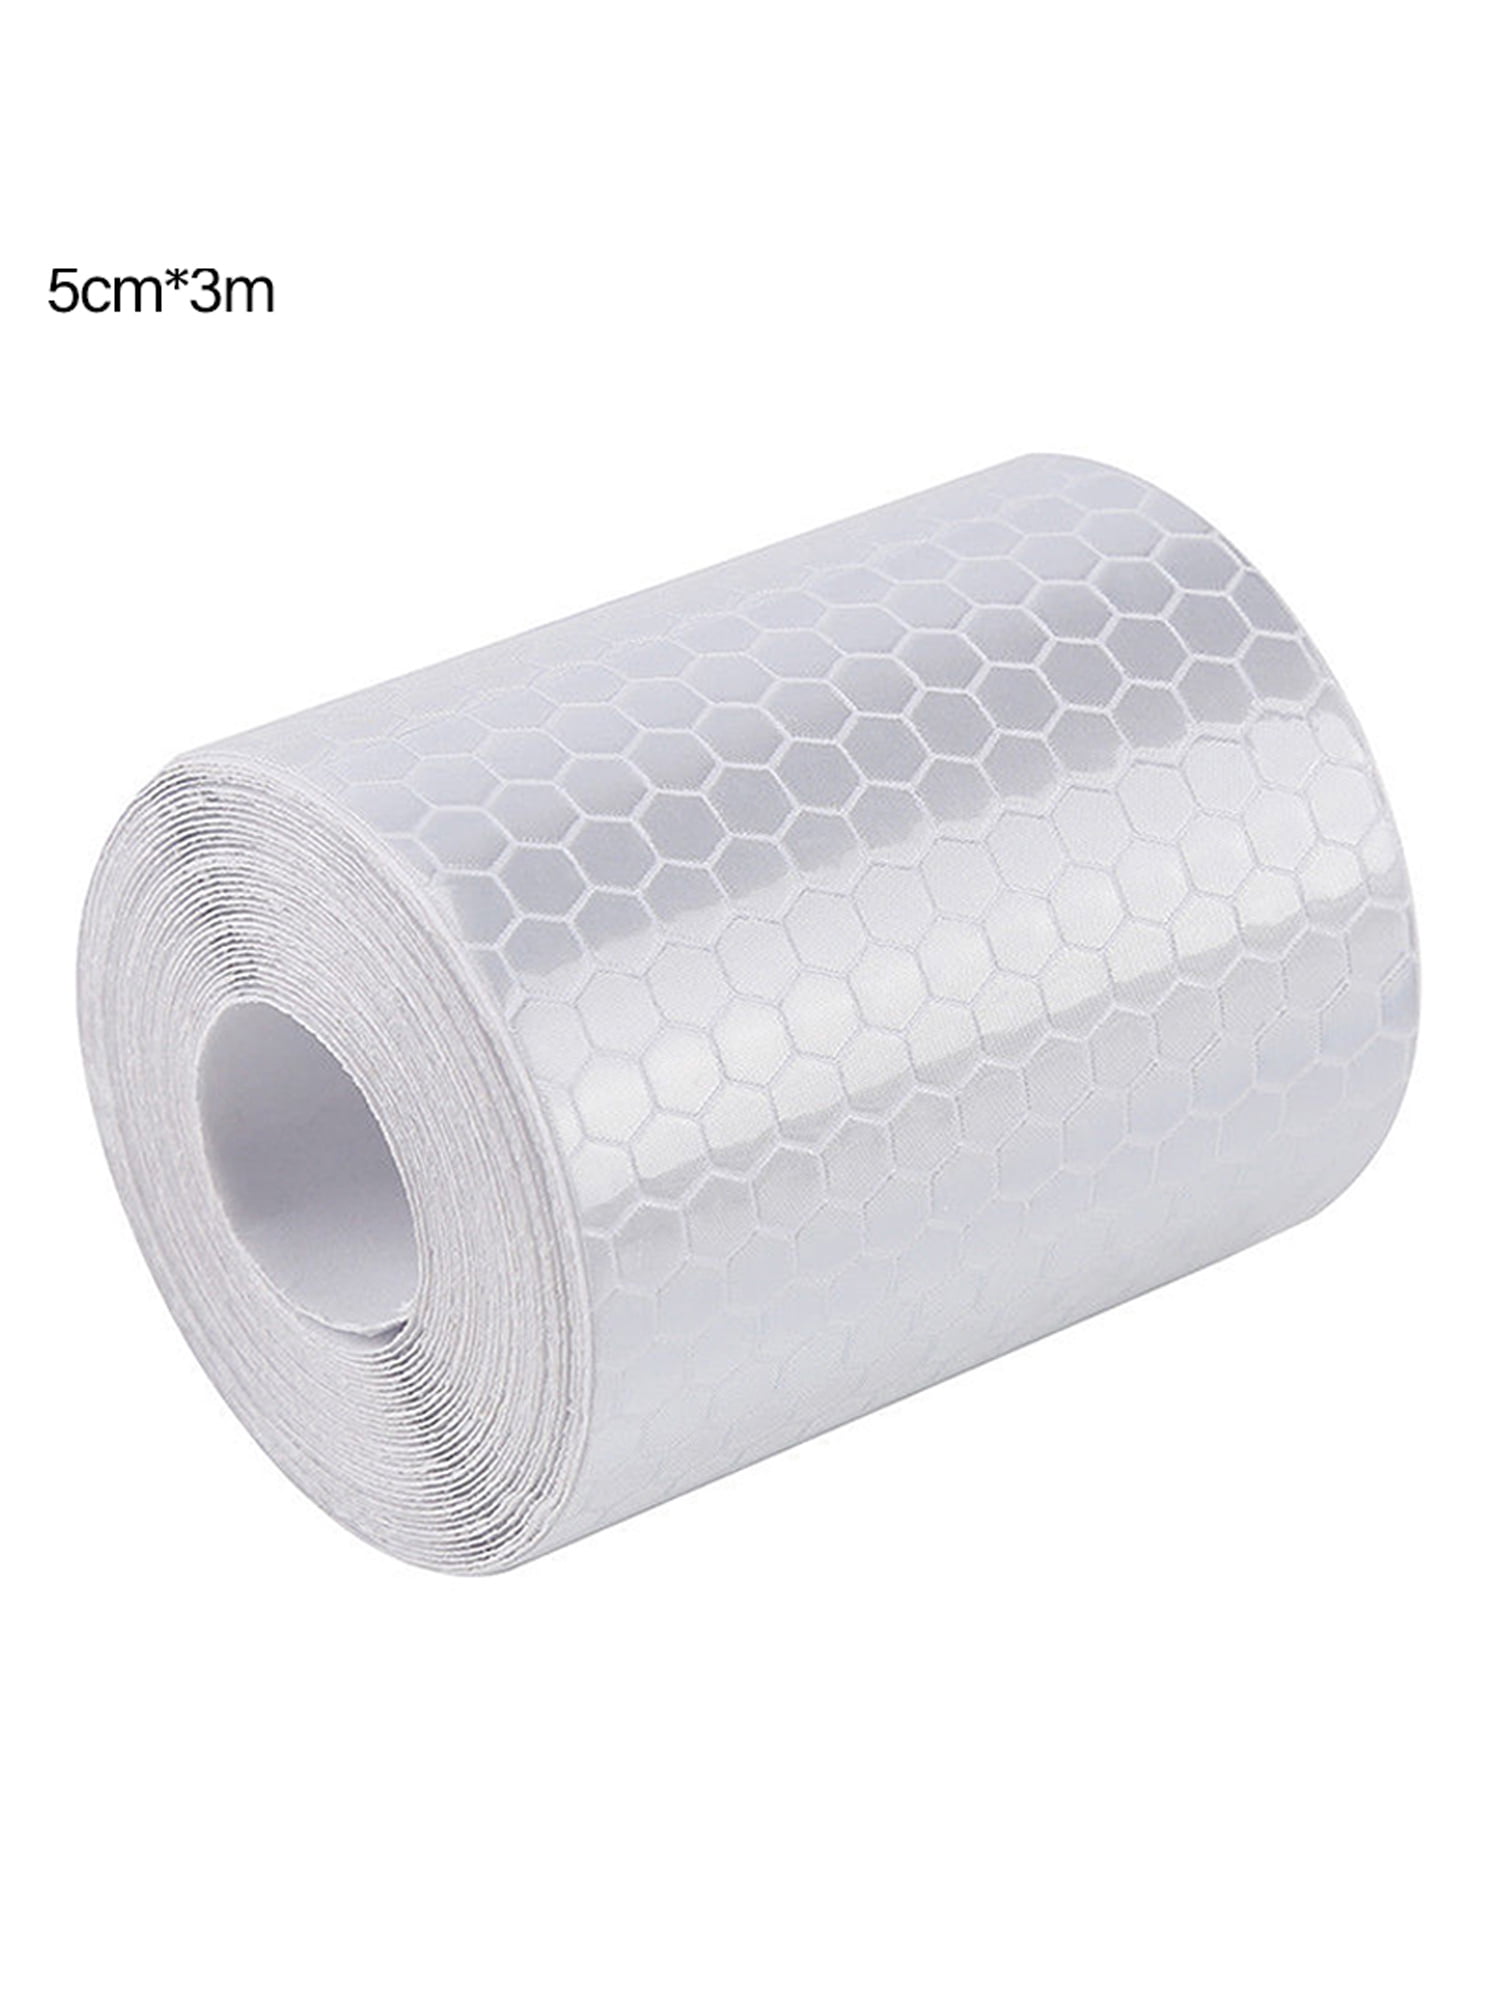 3m Car Truck Reflective Safety Warning Self-adhesive Roll Tape Sticker Decal 